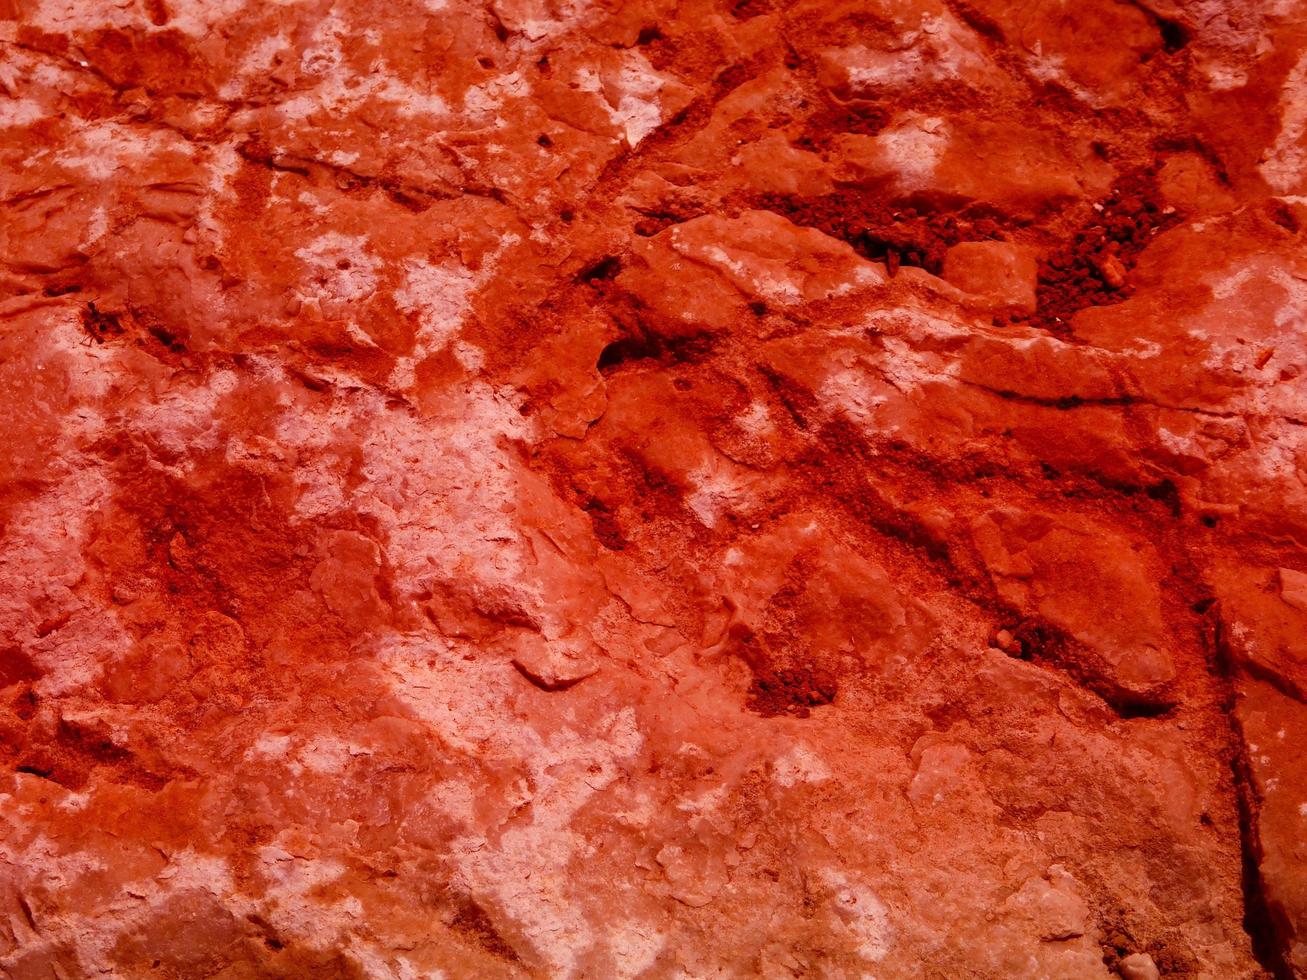 Red Stone Background Free Stock Photo - Public Domain Pictures